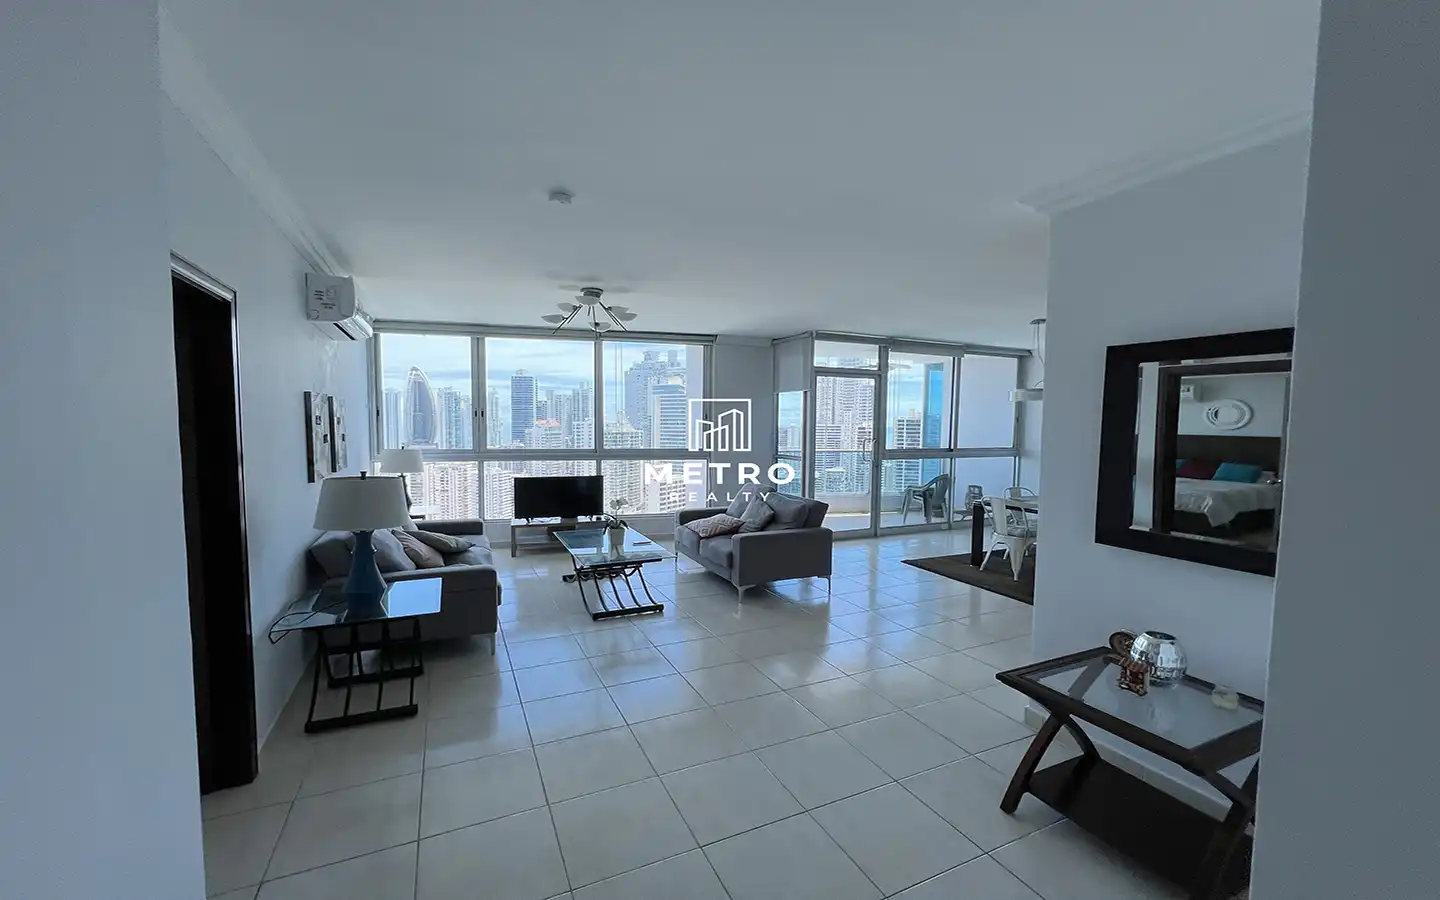 Grand Bay Tower Cinta Costera Panama Apartment for Sale living room lateral view